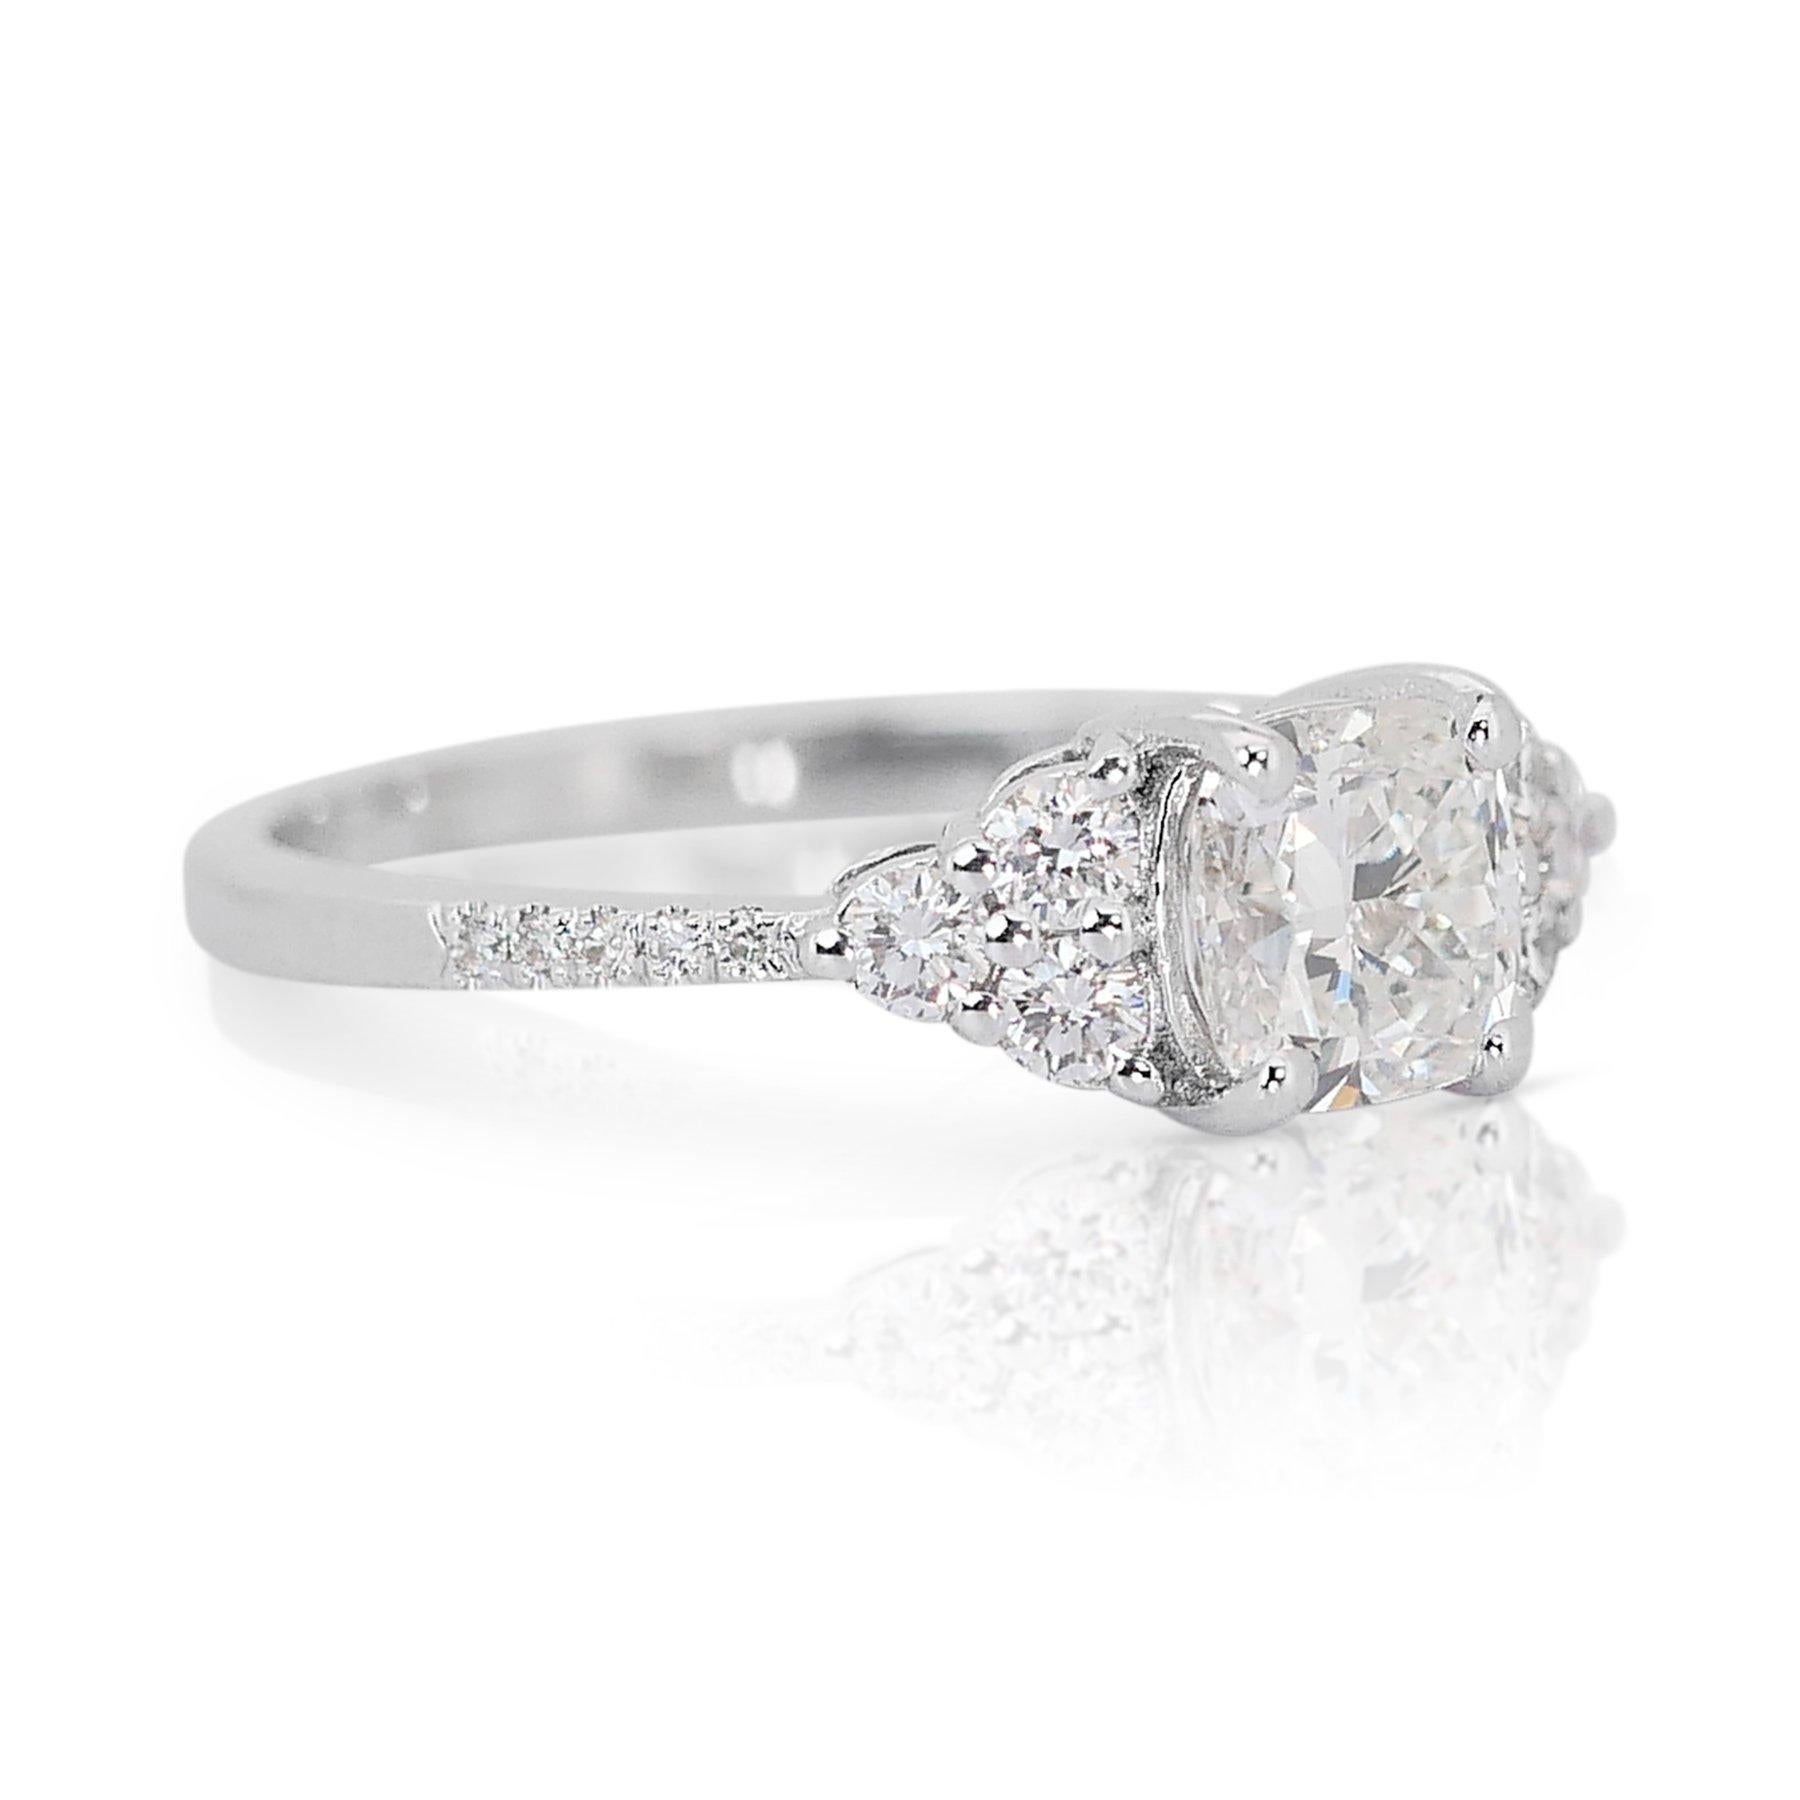 Magnificent 1.30ct Diamonds Pave Ring in 14k White Gold - GIA Certified

This magnificent ring crafted in 14k white gold epitomizes sophistication and purity, featuring a 1.00-carat cushion-cut main diamond that radiates unmatched brilliance.